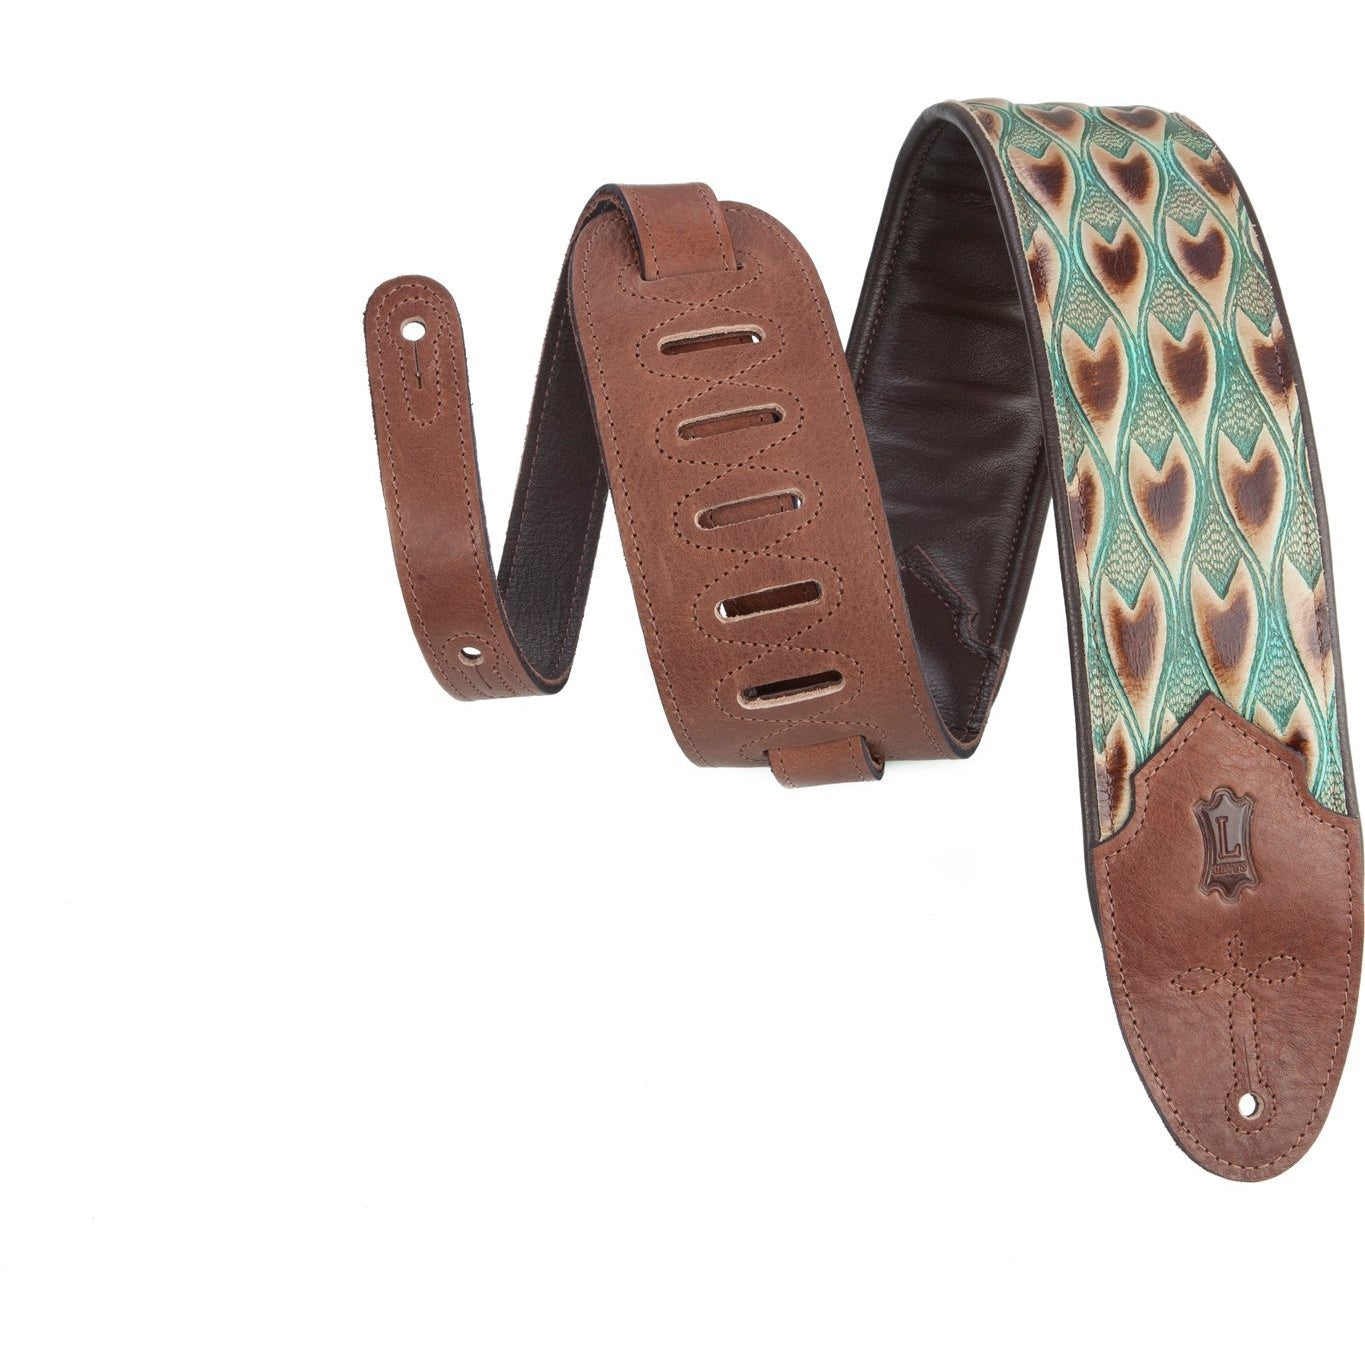 Levy's 3 Inch Wide Embossed Leather Guitar Strap, Arrowhead Turquoise, M4WP-004